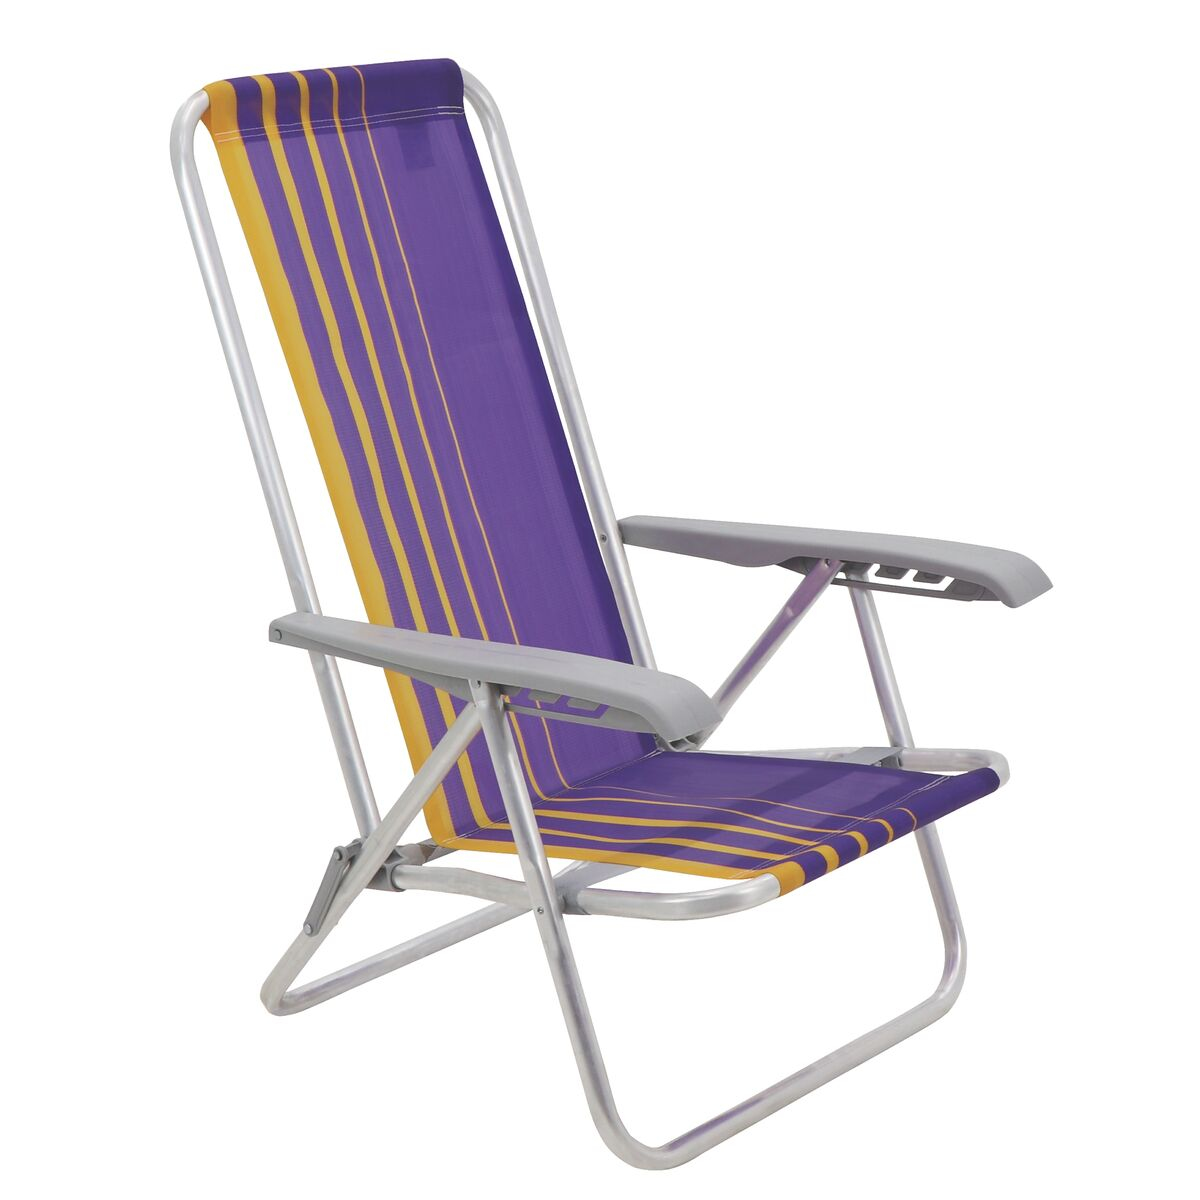 Tramontina Bali Aluminum Beach Reclining Chair with Purple and Yellow Seat